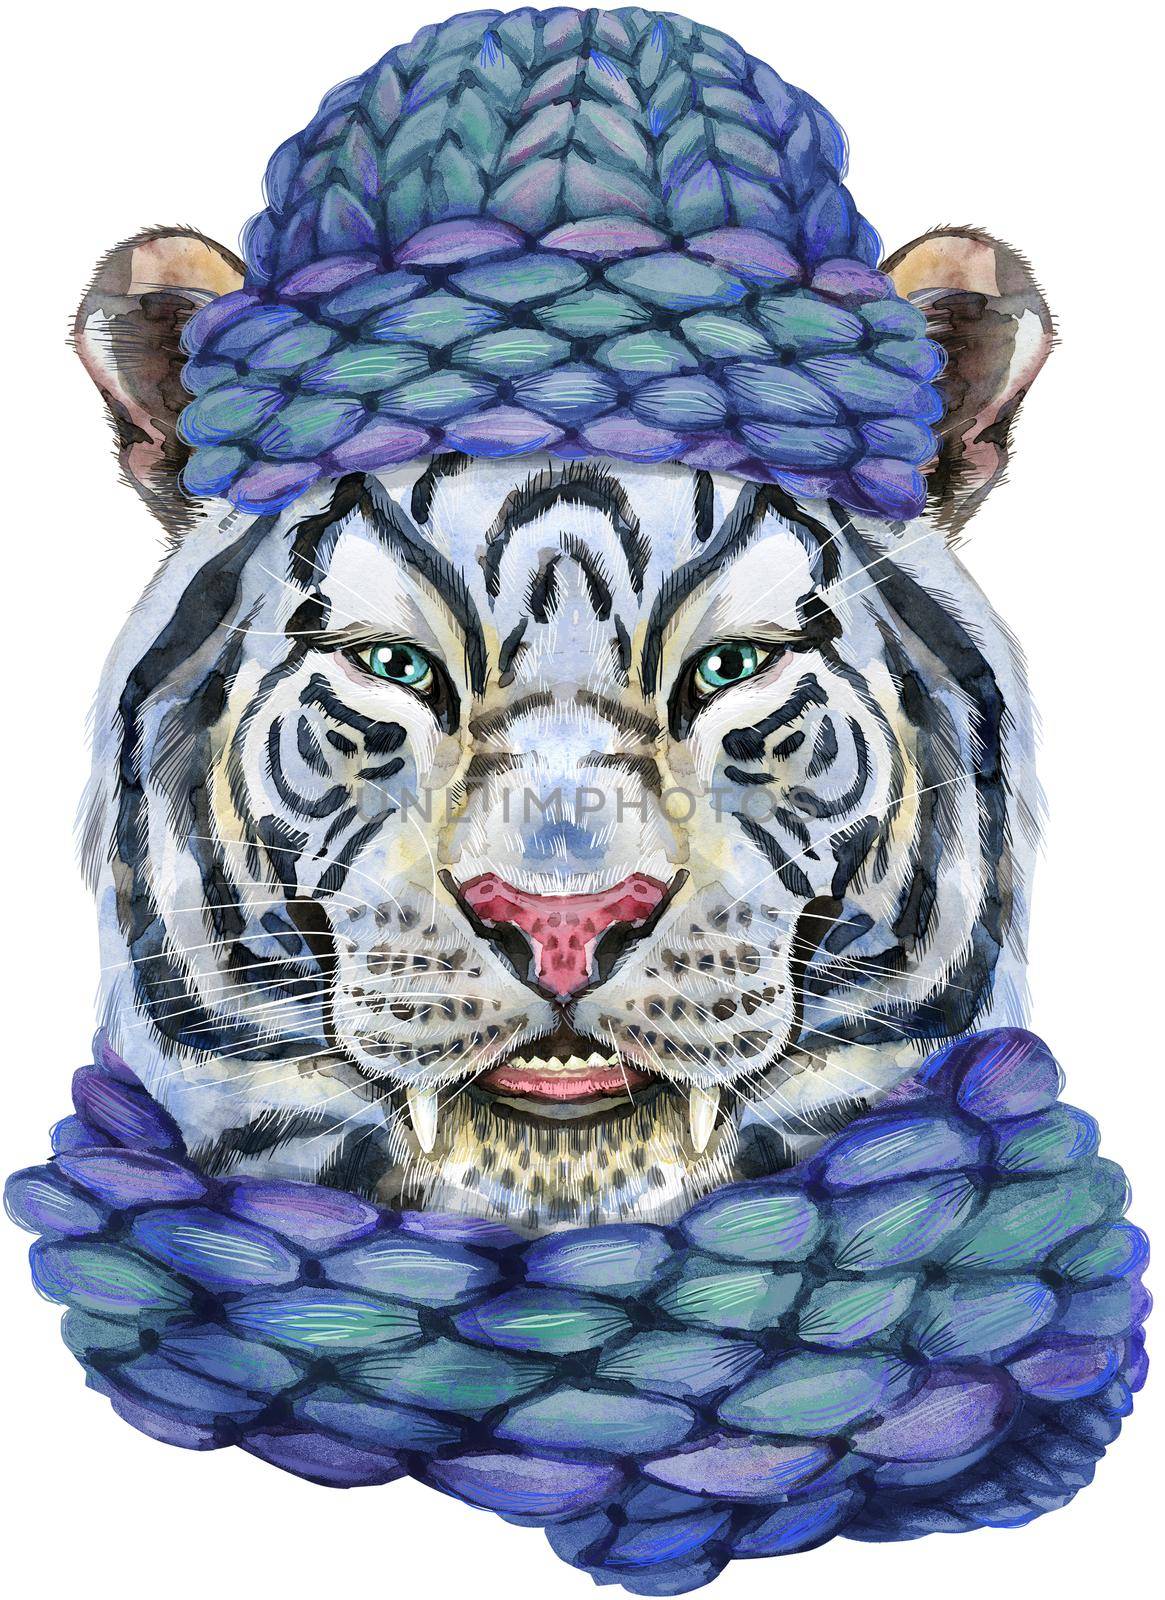 Colorful white smiling tiger in a blue knitted hat. Wild animal watercolor illustration on white background by NataOmsk